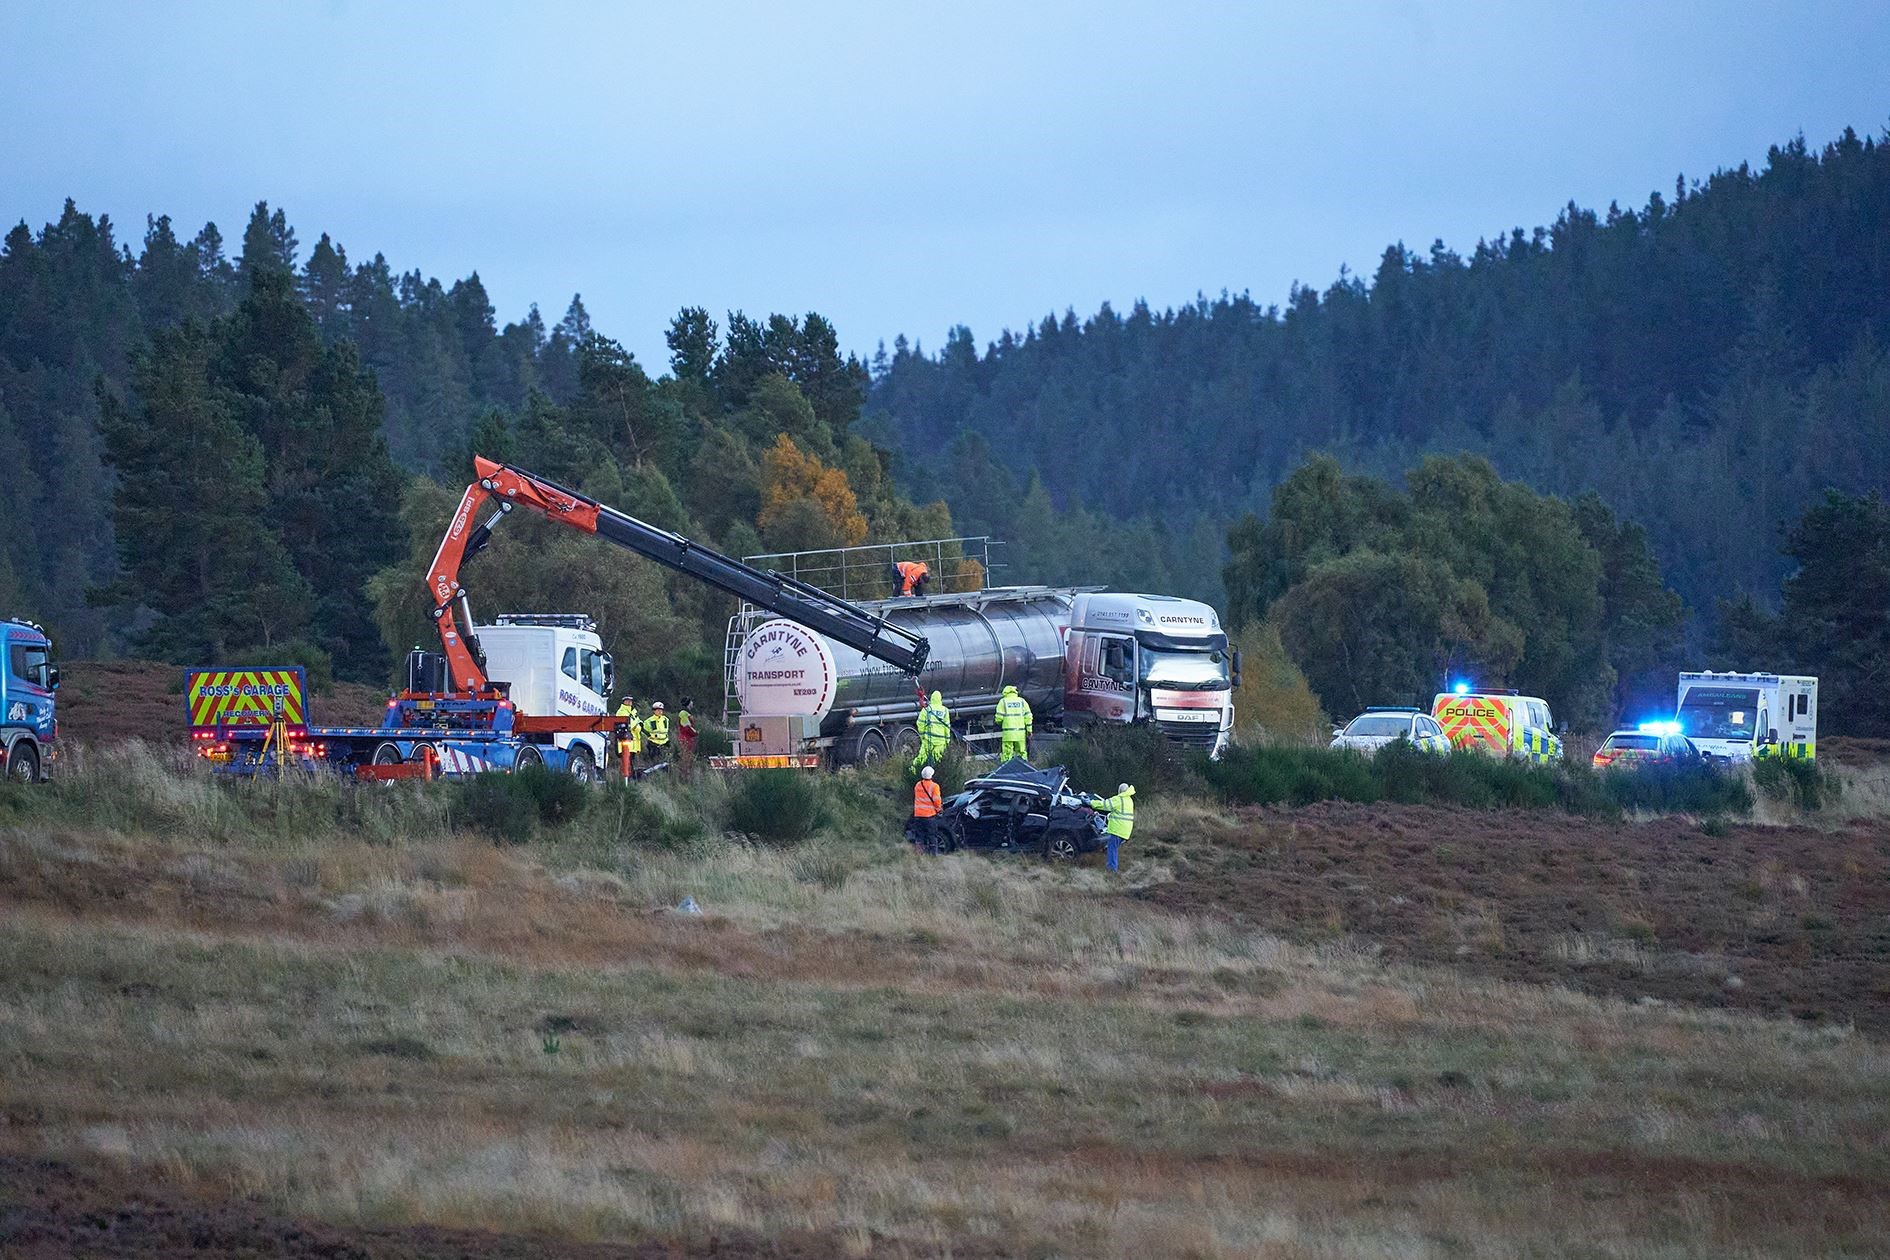 A recovery vehicle removed the wreckage from the scene of the accident at the Dava. Picture: Jasper Images